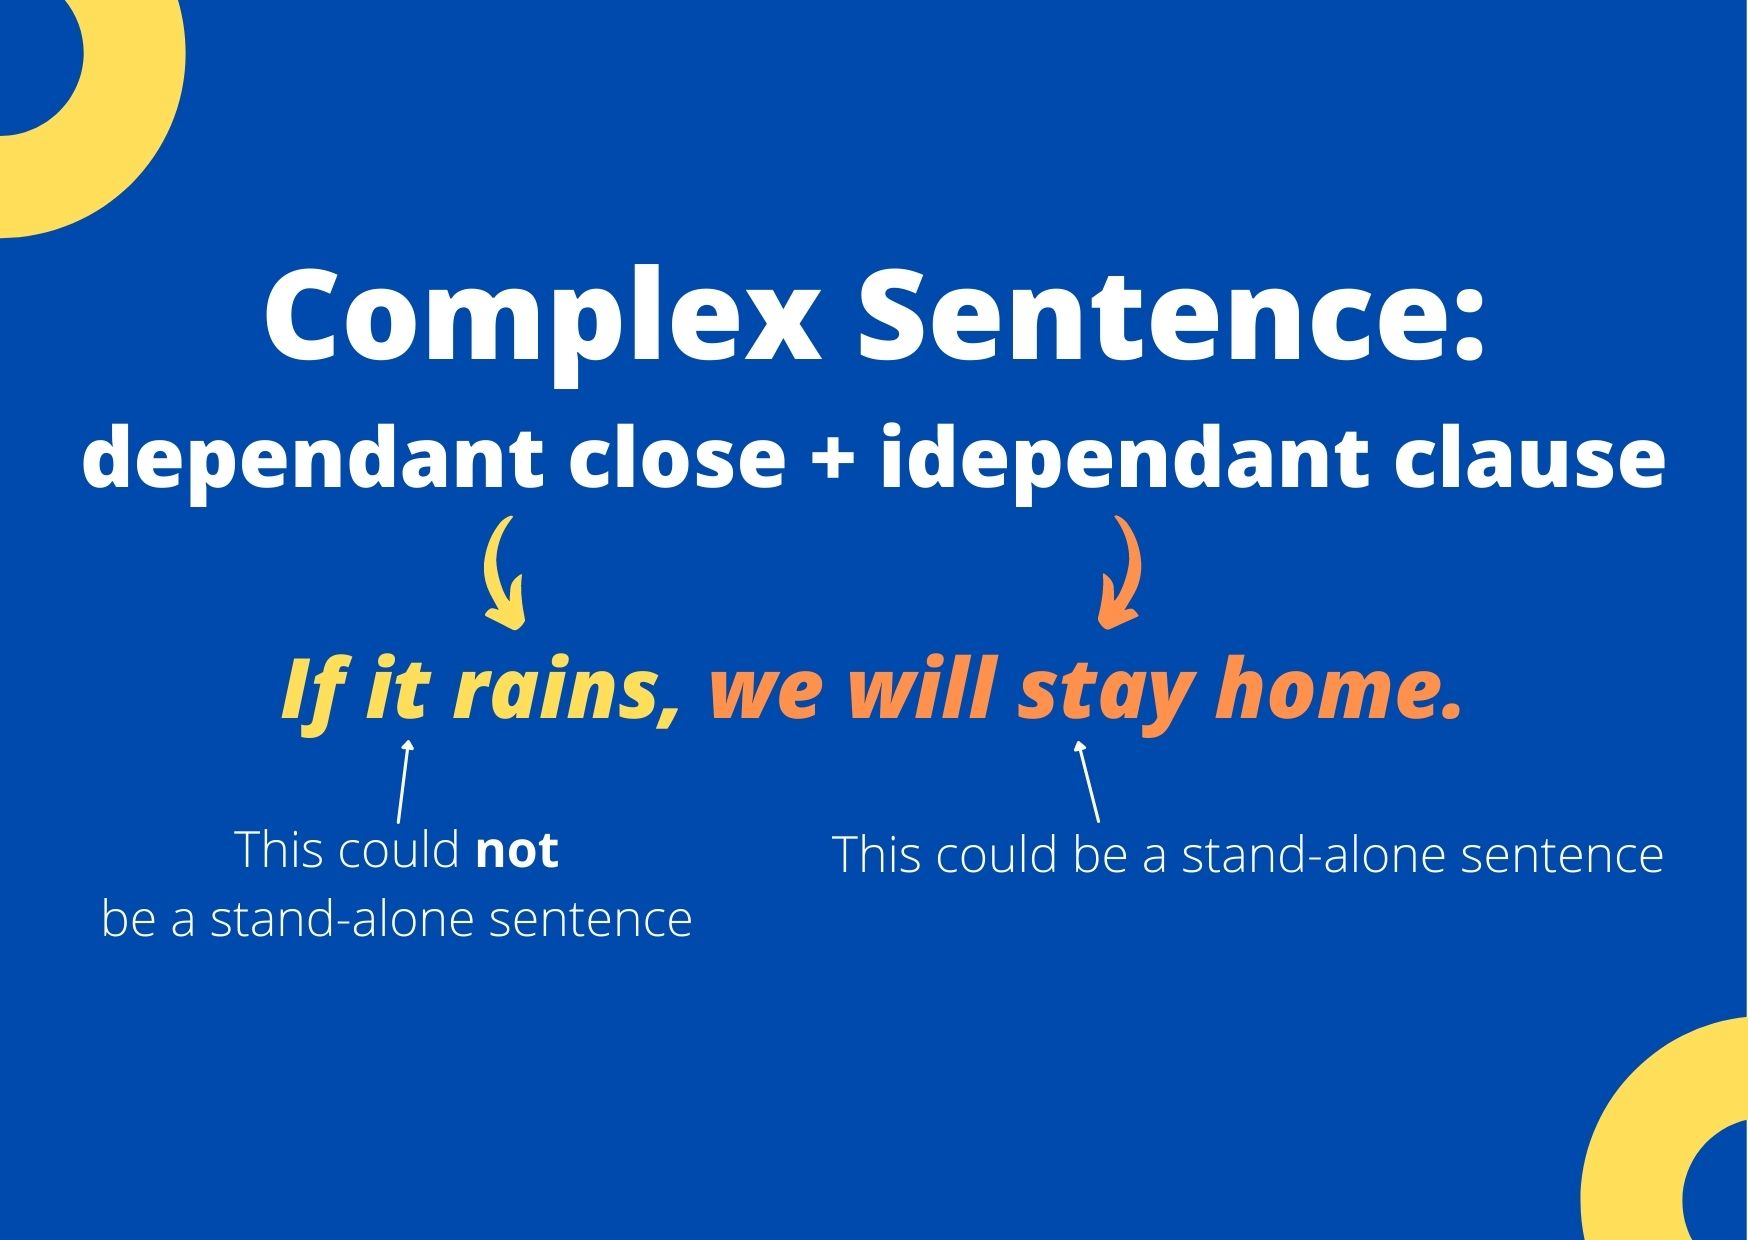 A graphic explaining a complex sentence: a dependant clause connected to a independent clause